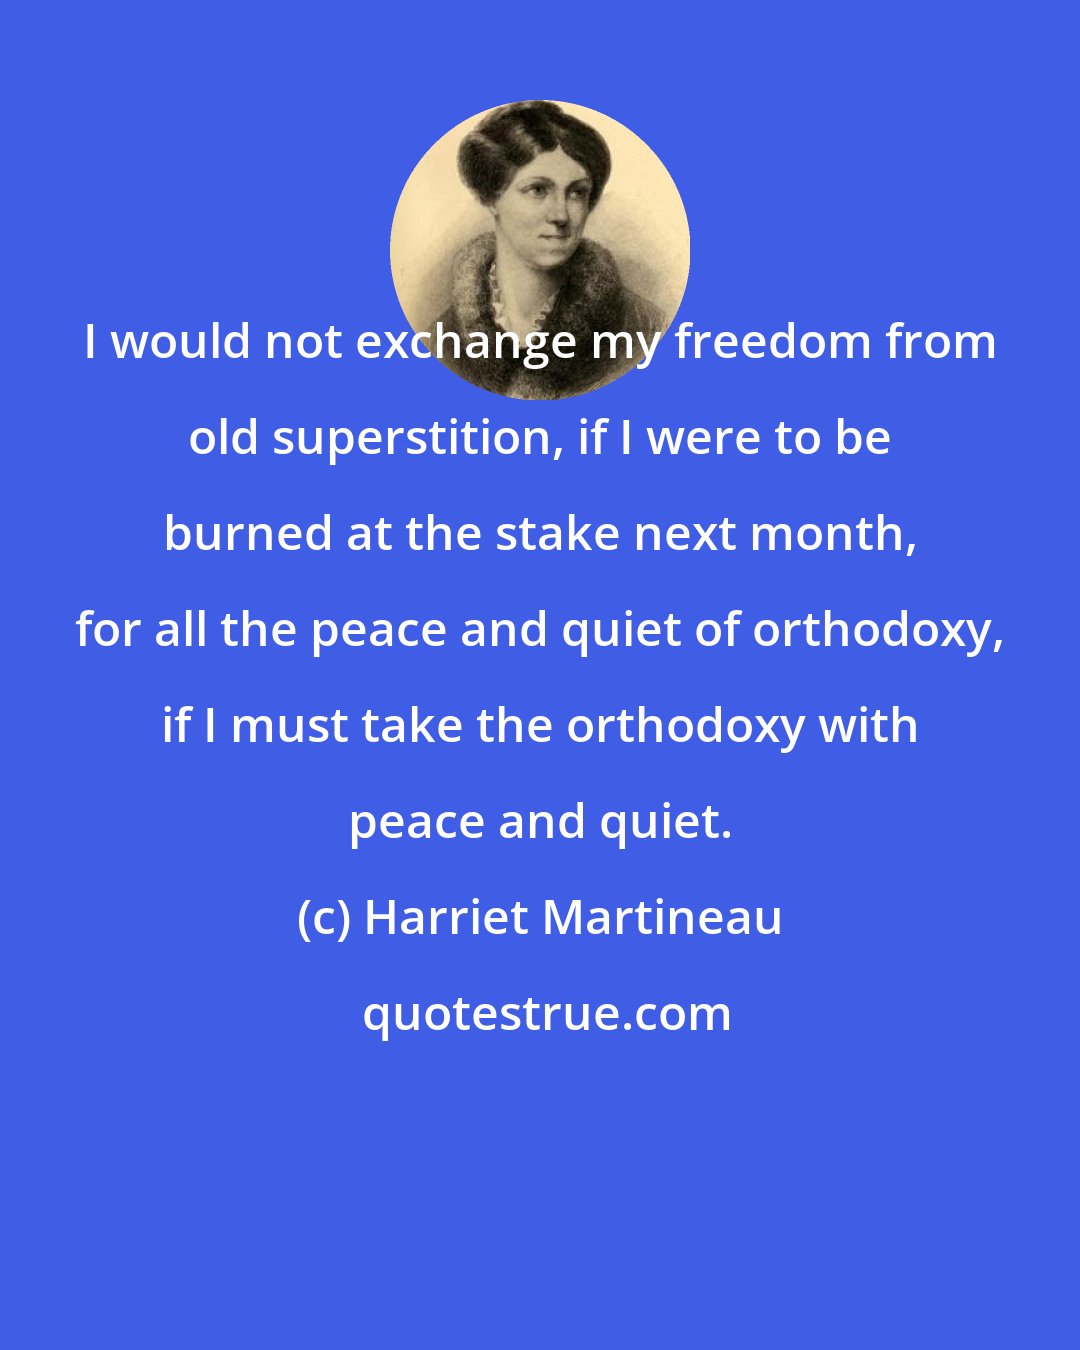 Harriet Martineau: I would not exchange my freedom from old superstition, if I were to be burned at the stake next month, for all the peace and quiet of orthodoxy, if I must take the orthodoxy with peace and quiet.